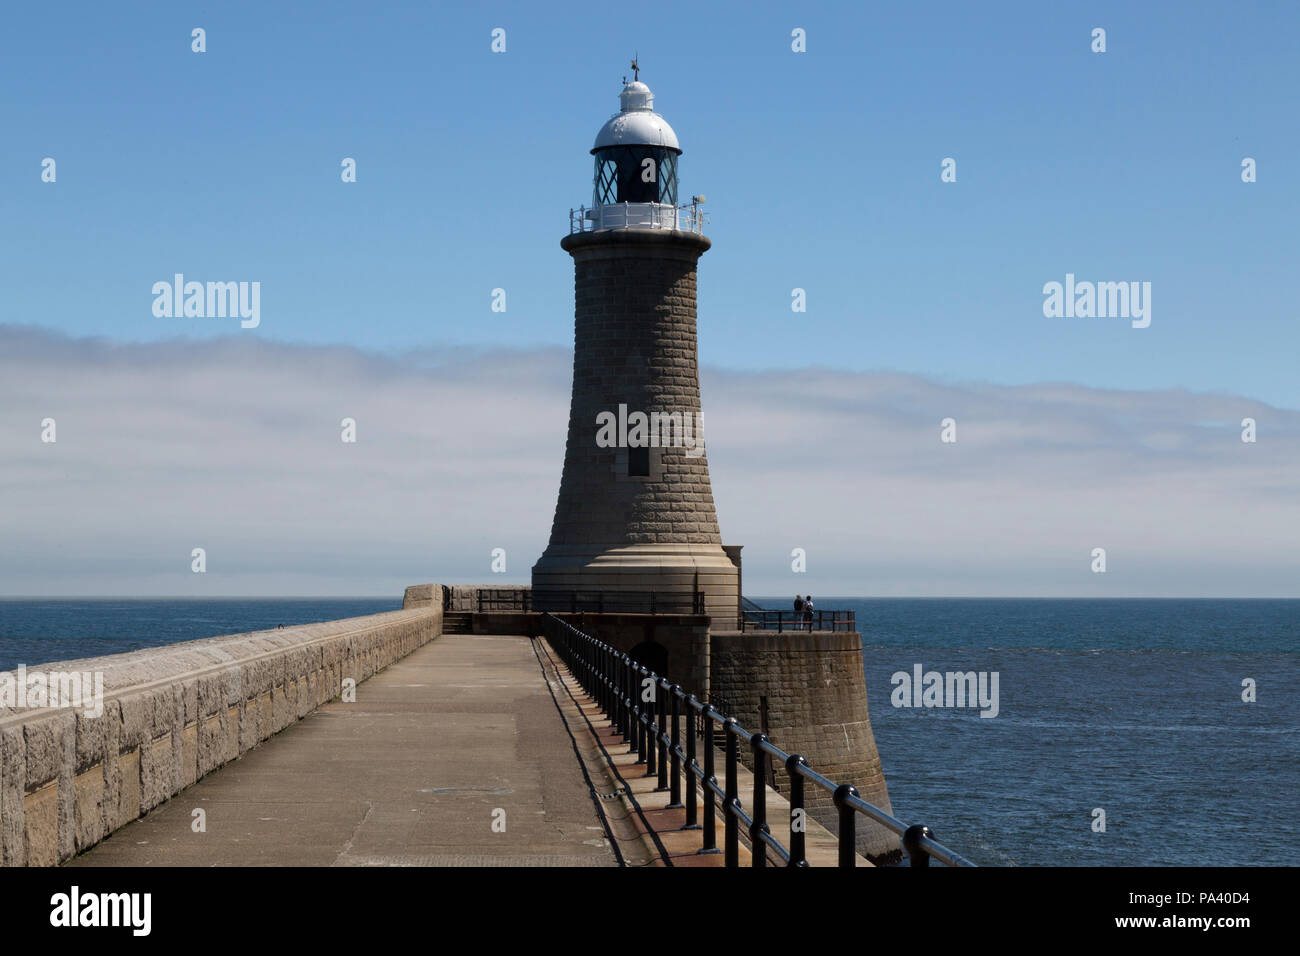 Tynemouth Lighthouse at Tynemouth in England. The lighthouse stands on the North Pier that was designed by John Wolfe-Barry and reconstructed in 1909. Stock Photo